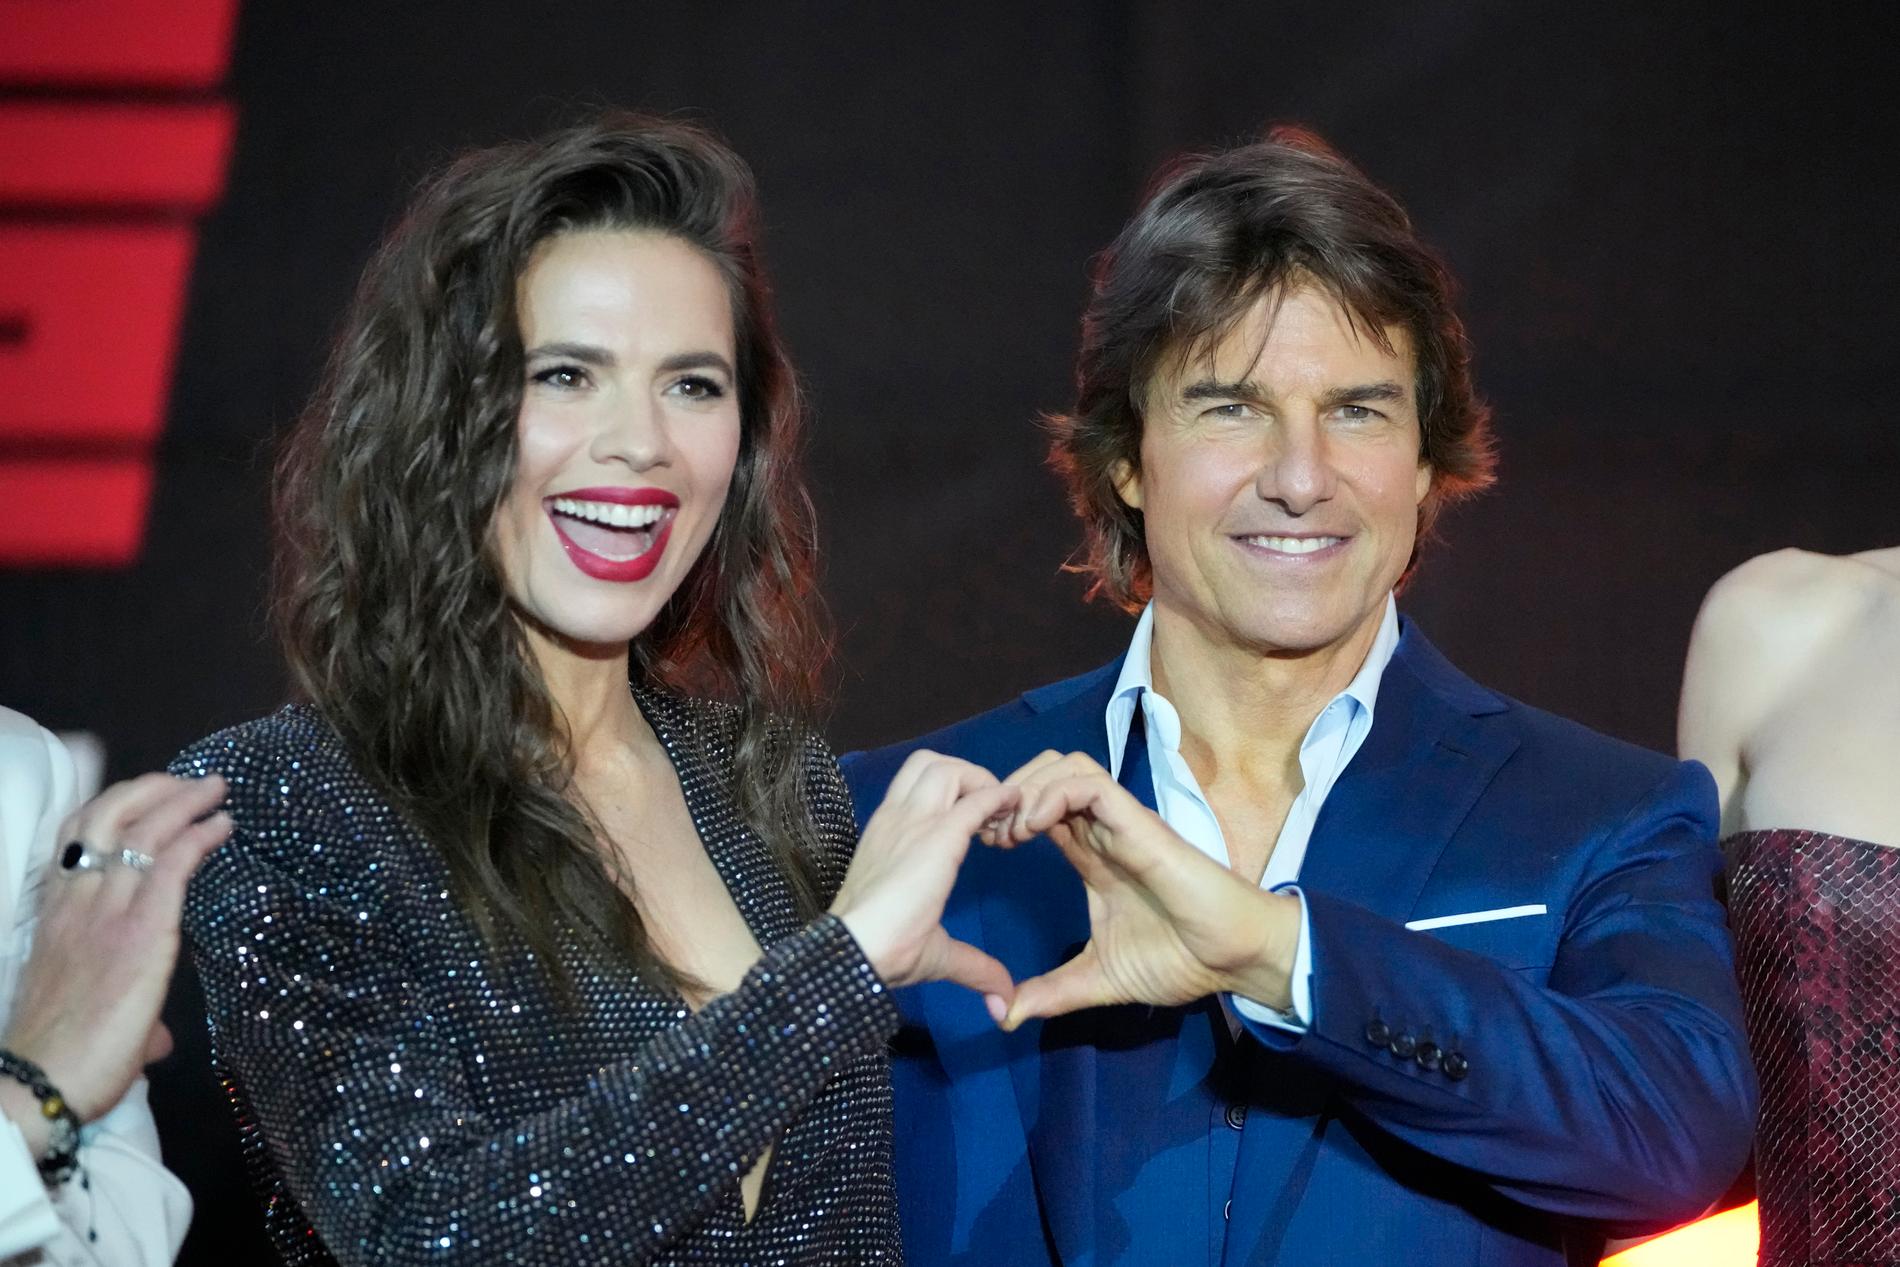  Hayley Atwell och Tom Cruise i nya ”Mission: Impossible”.